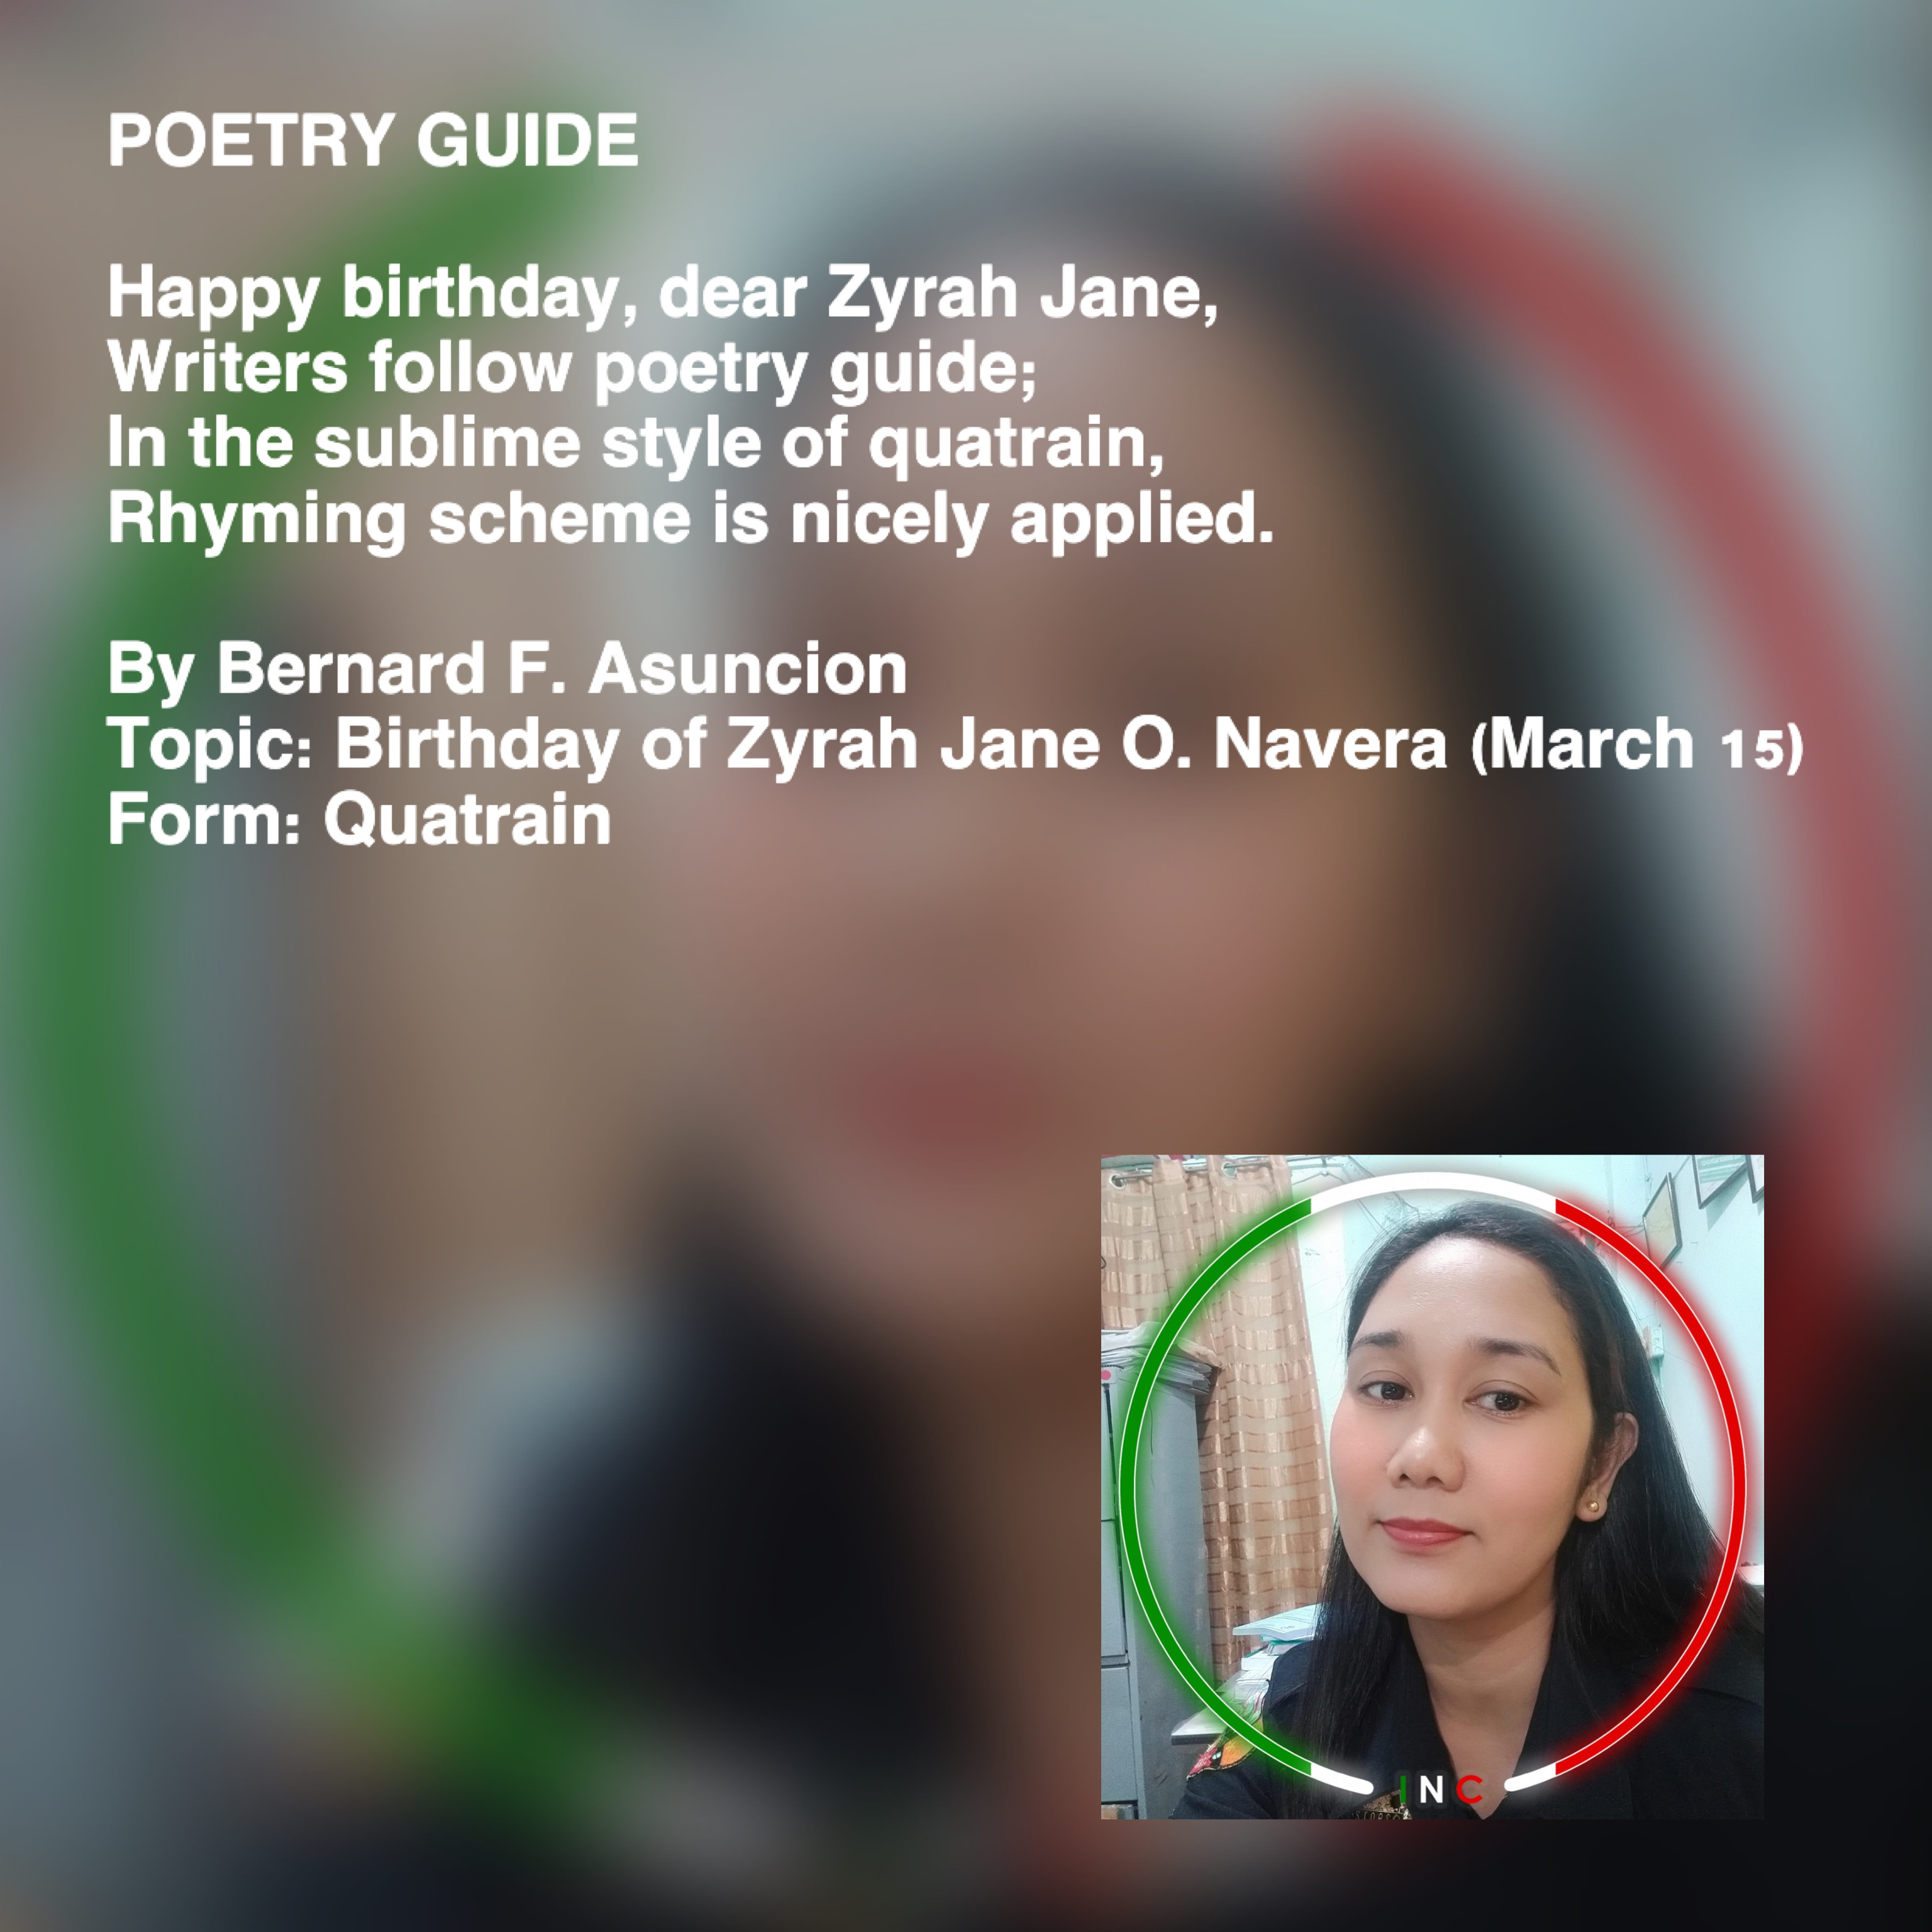 Poetry Guide